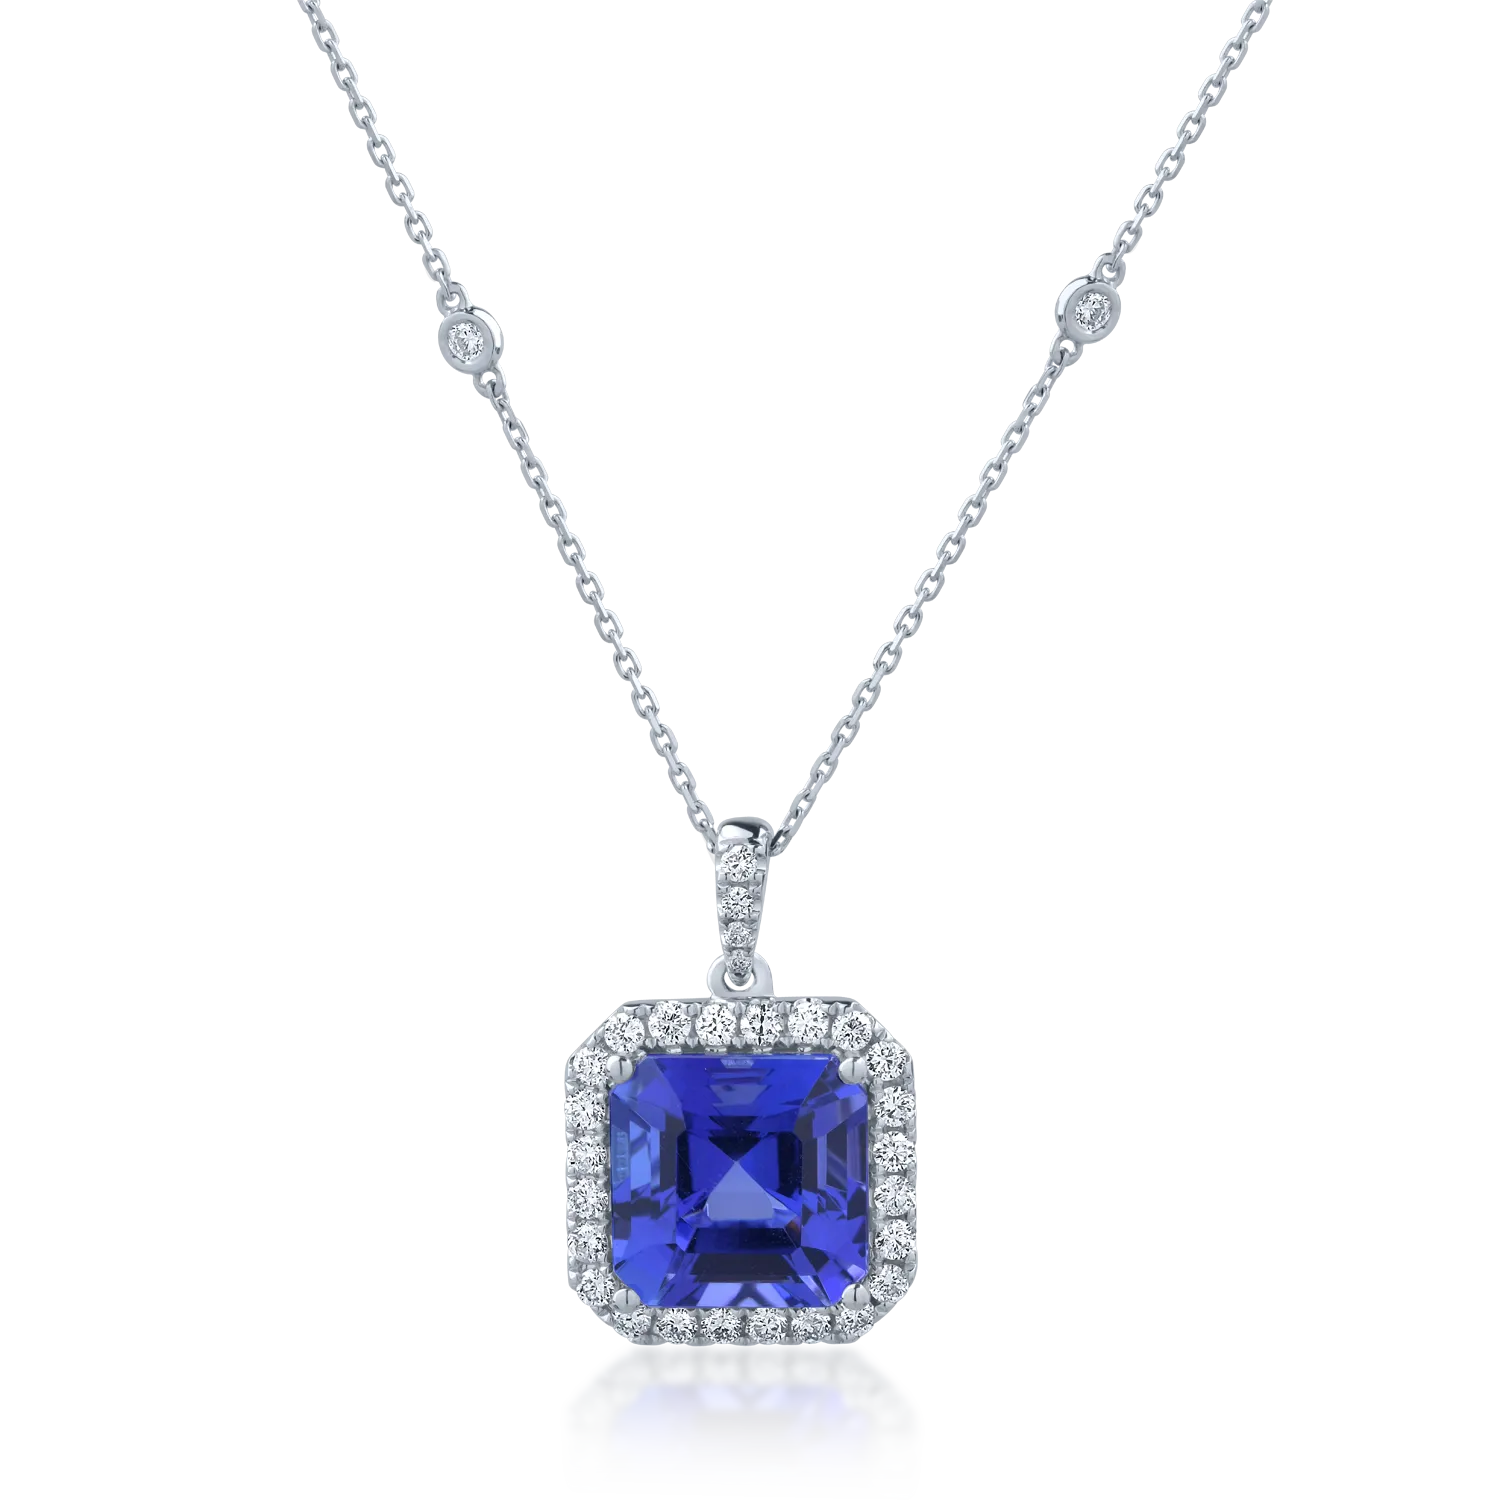 18K white gold pendant necklace with 7.18ct tanzanite and 0.63ct diamonds